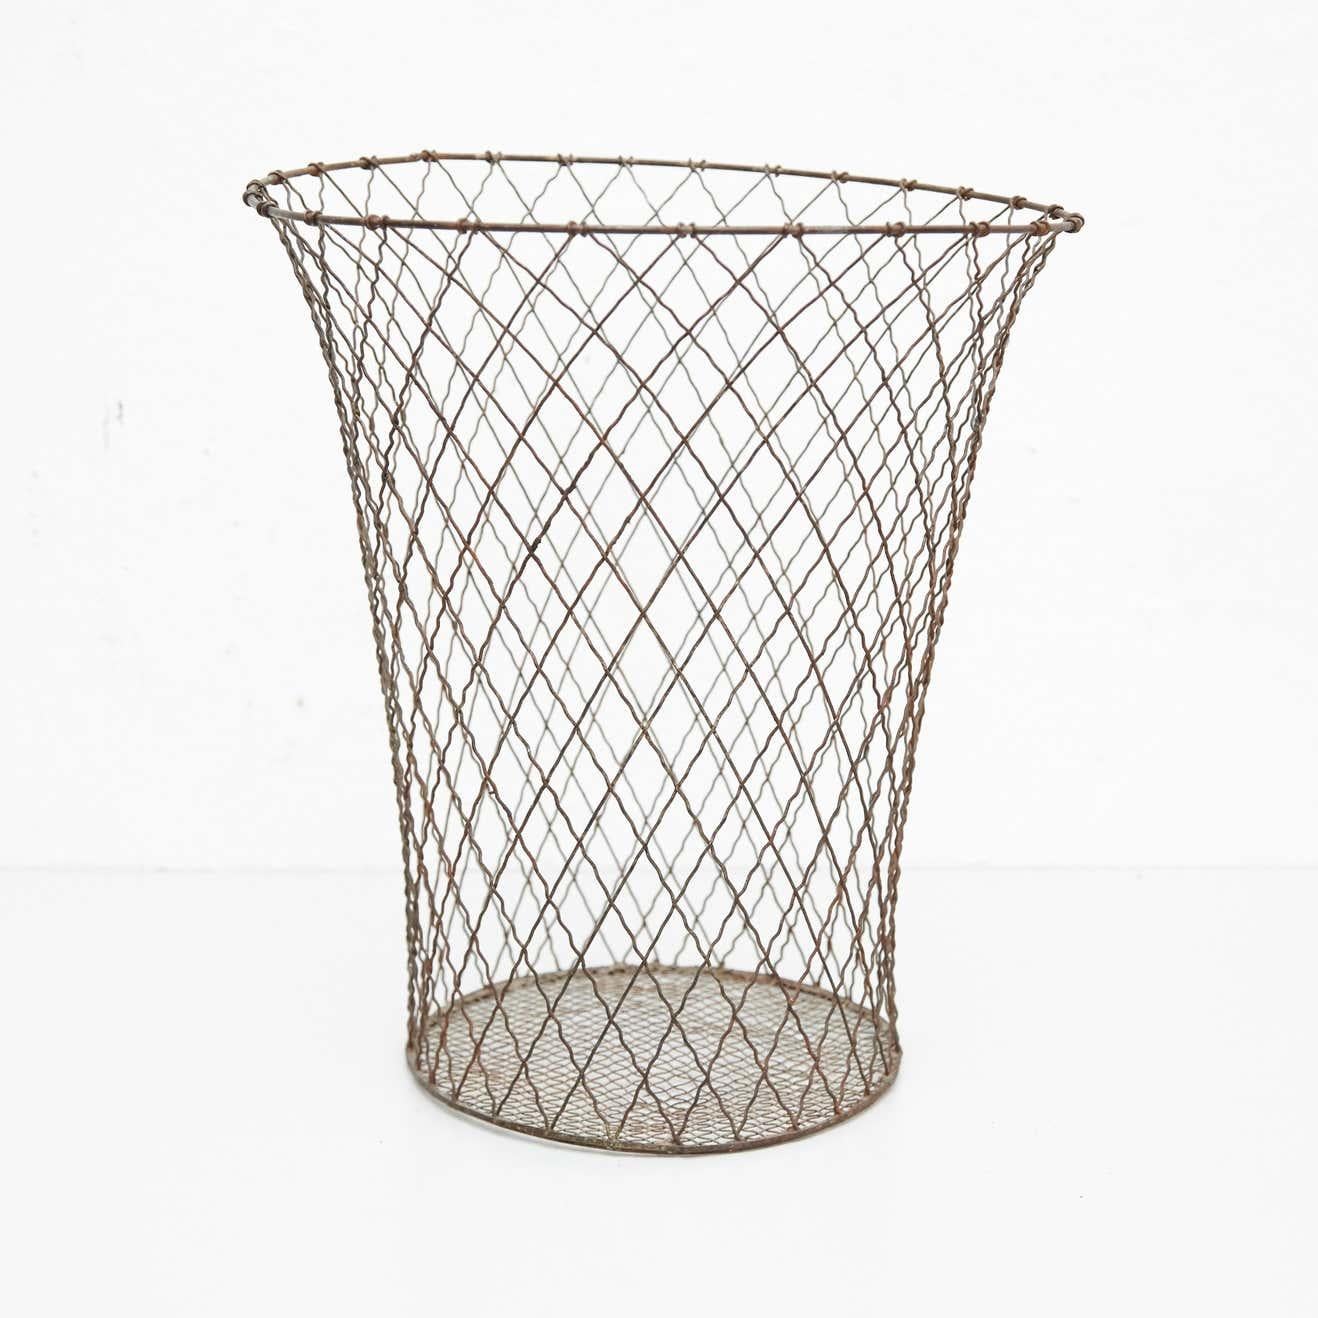 Metal paper bin made by wire woven in a classic cross-hatched pattern completed by a solid ring. 
Unknown manufacturer, France,
circa 1940

Materials:
Metal

Dimensions:
30 diameter x 3.5 height cm

In original condition, with minor wear